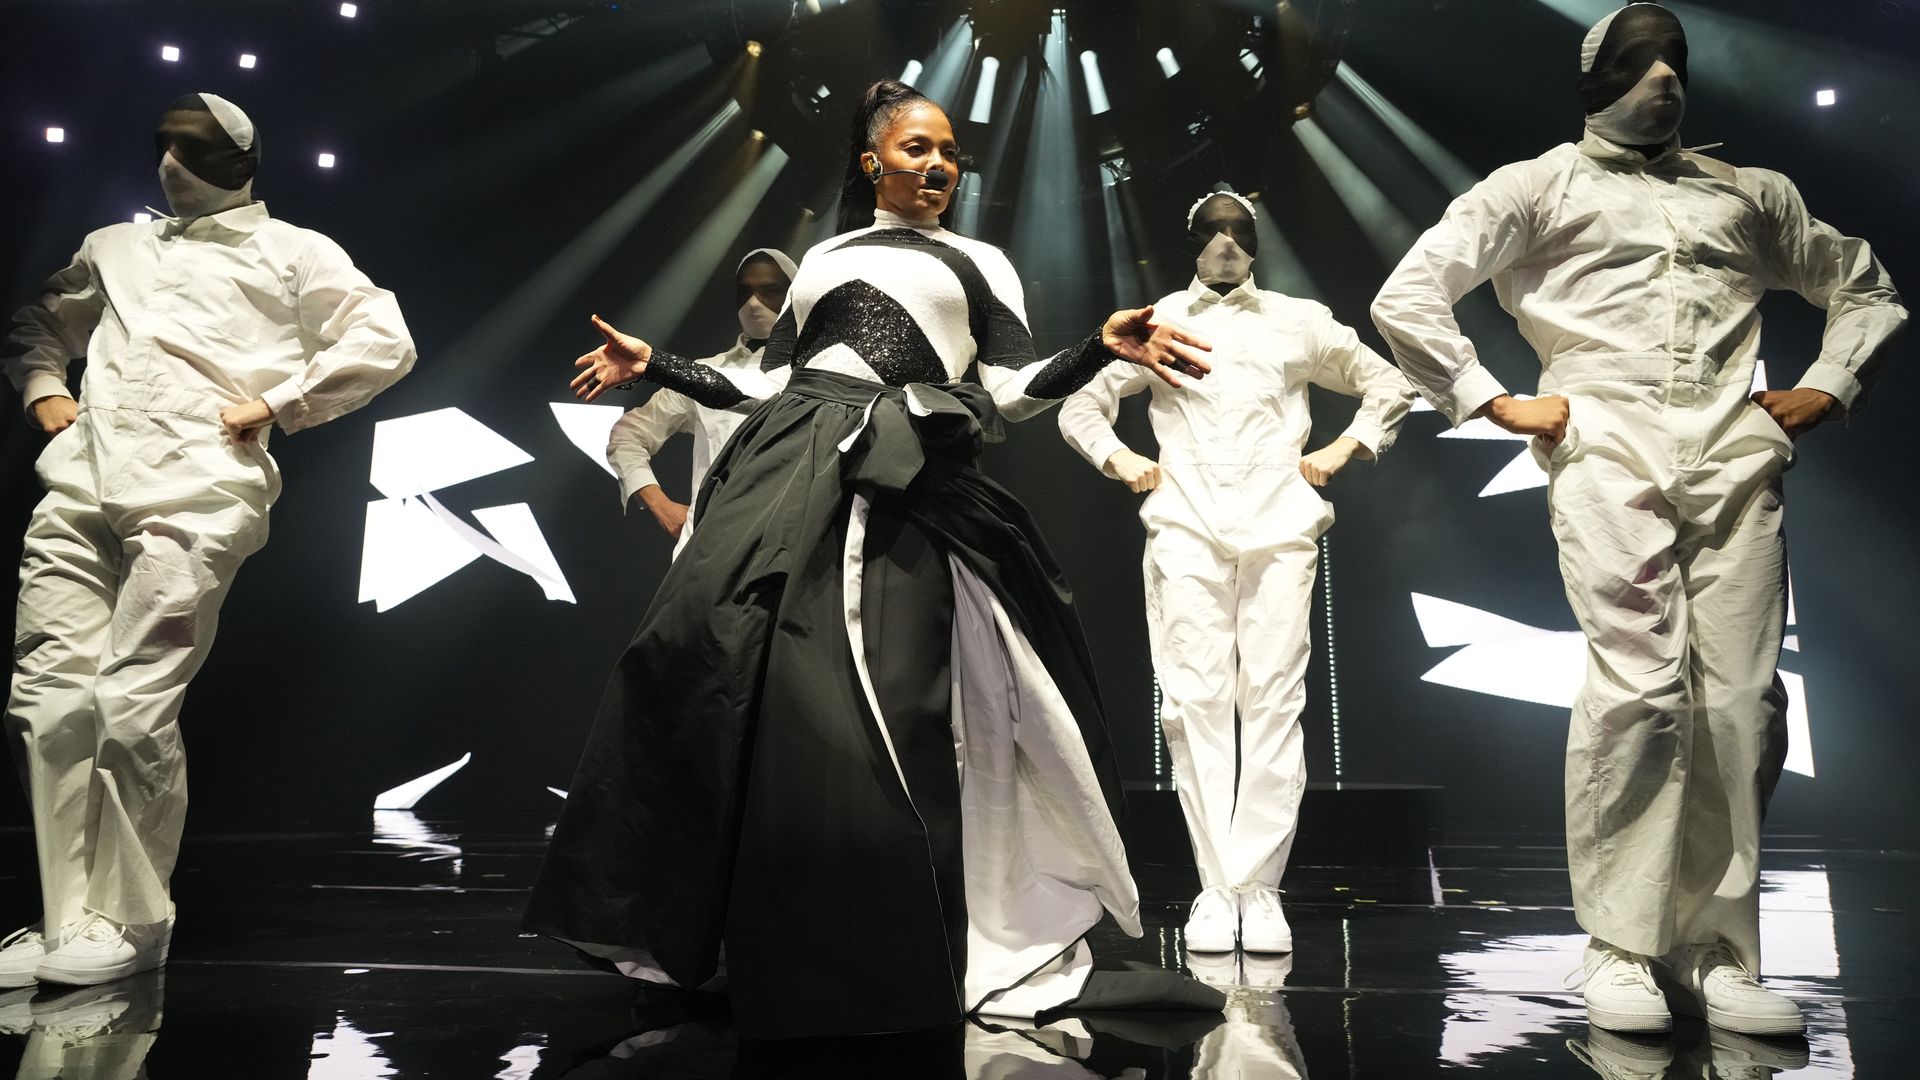 Photo shows Janet Jackson on stage with dancers dressed in white.